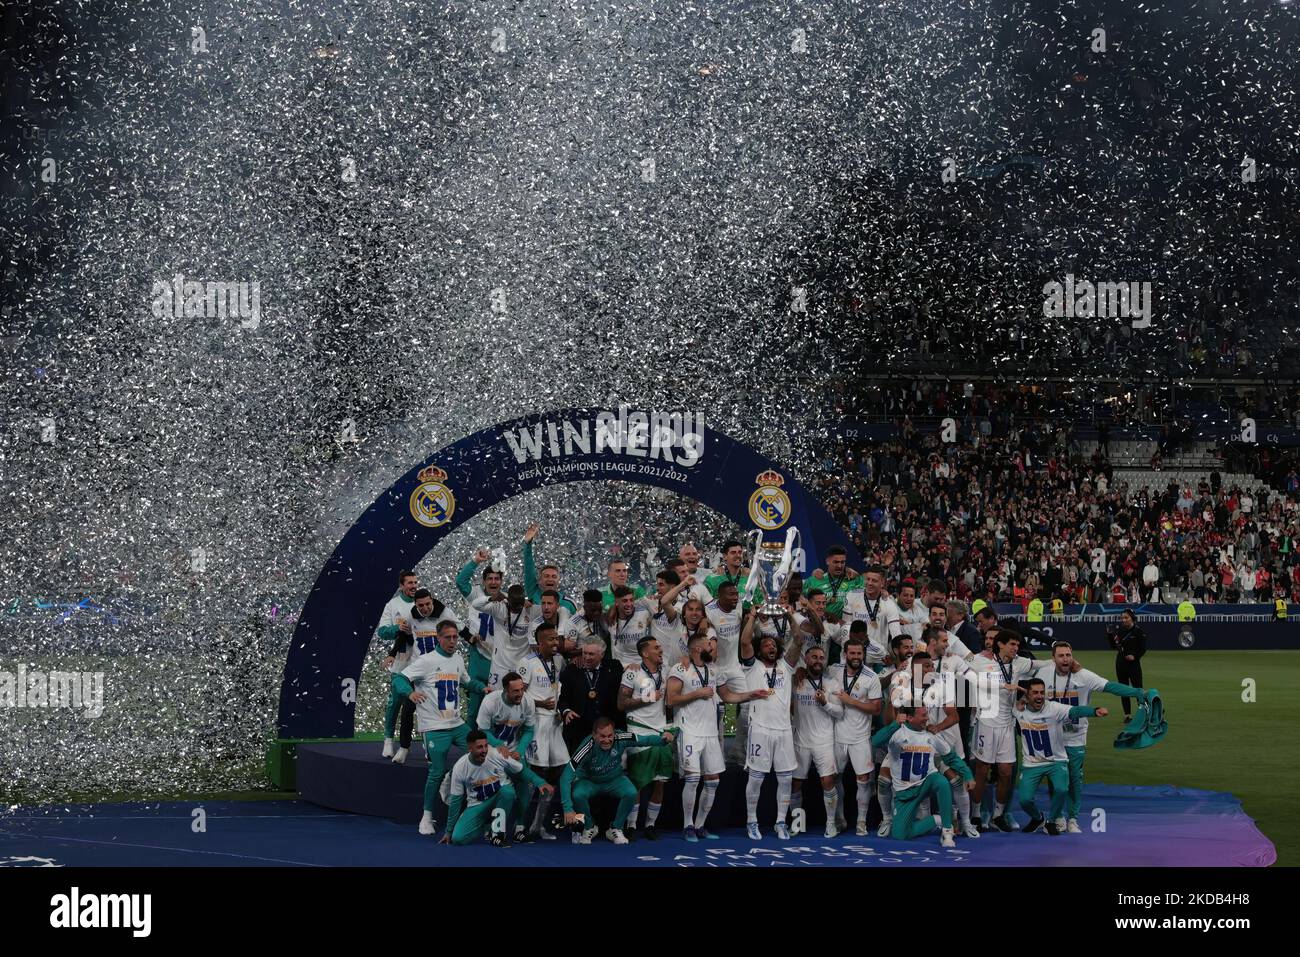 Real Madrid Beat Liverpool To Win 2021/2022 Champions League – Channels  Television